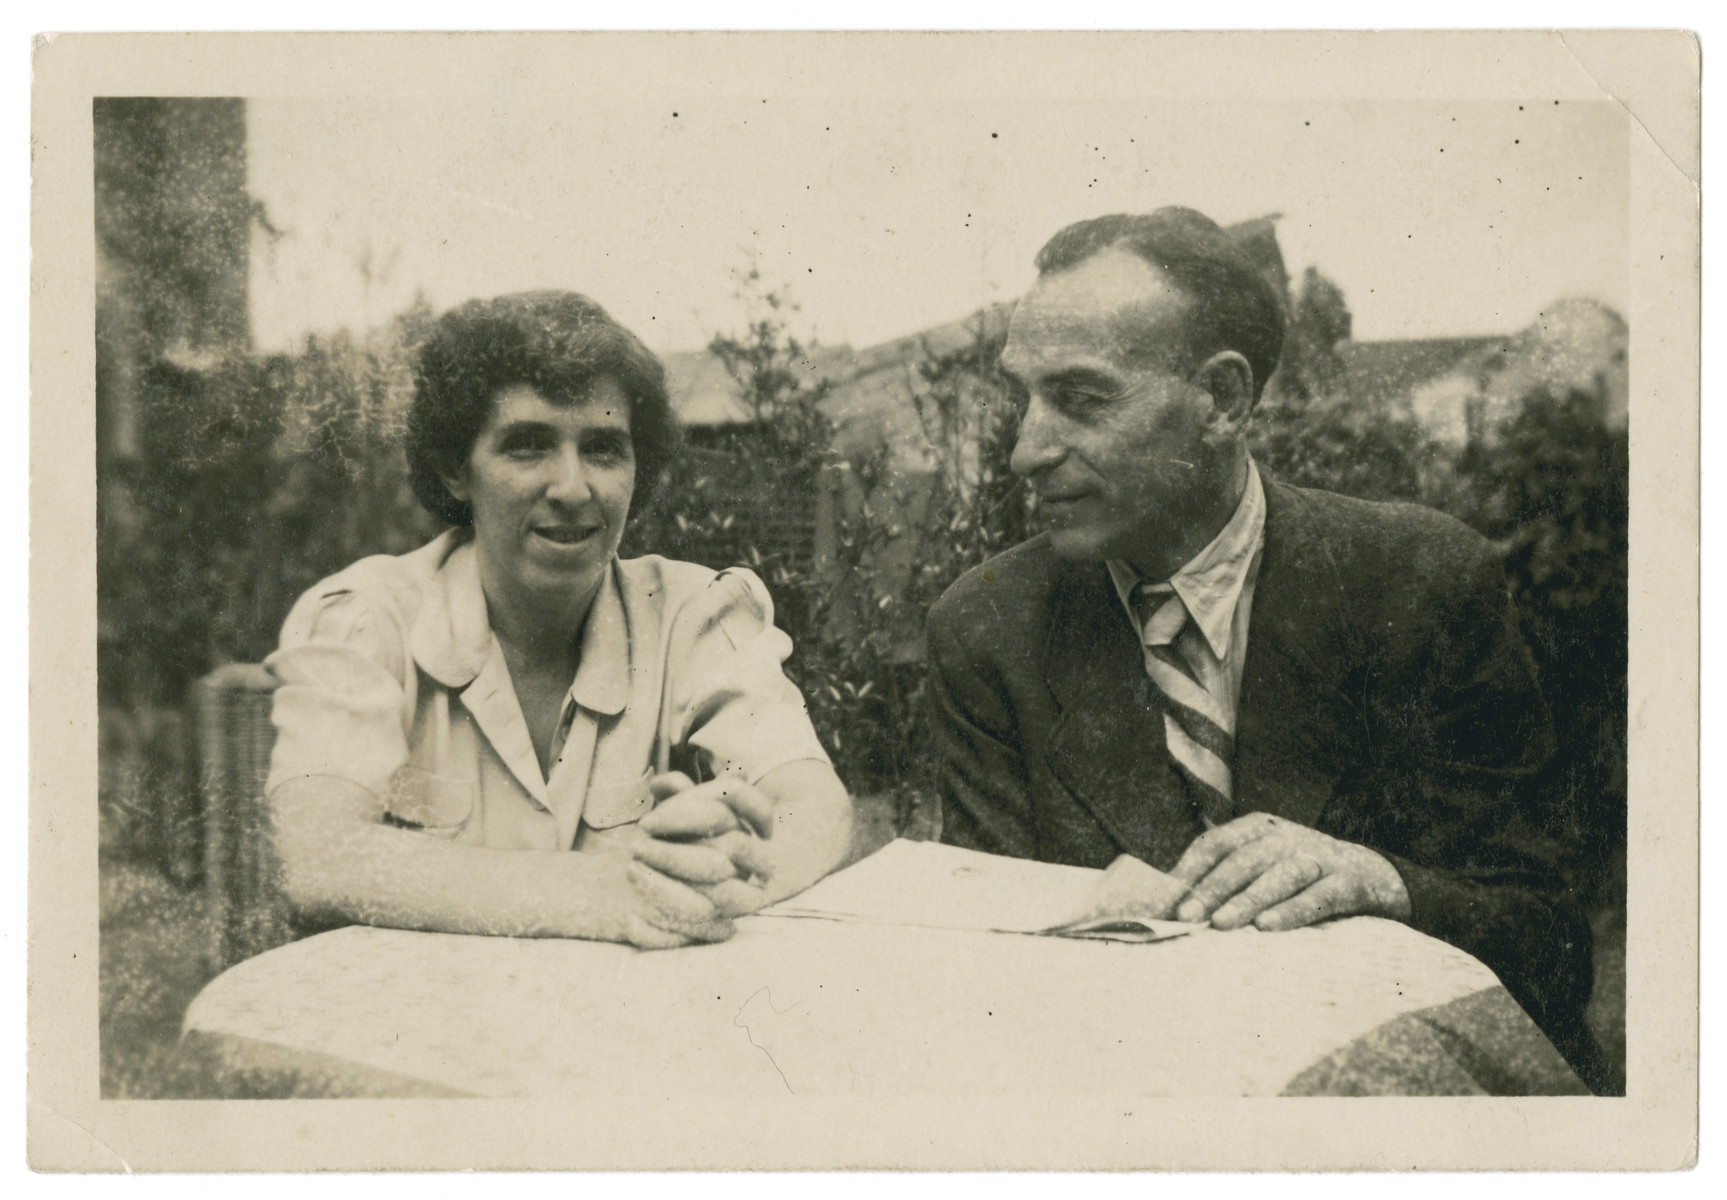 Jewish refugees Max and Erna (nee Weissblum) Pikarski (aunt and uncle of the donor) sit at an outside table in Shanghai.

They formerly lived in Neurode, Schlesien.  After the war both came to Oakland, California with many members of their family who had fled Germany to Shanghai.